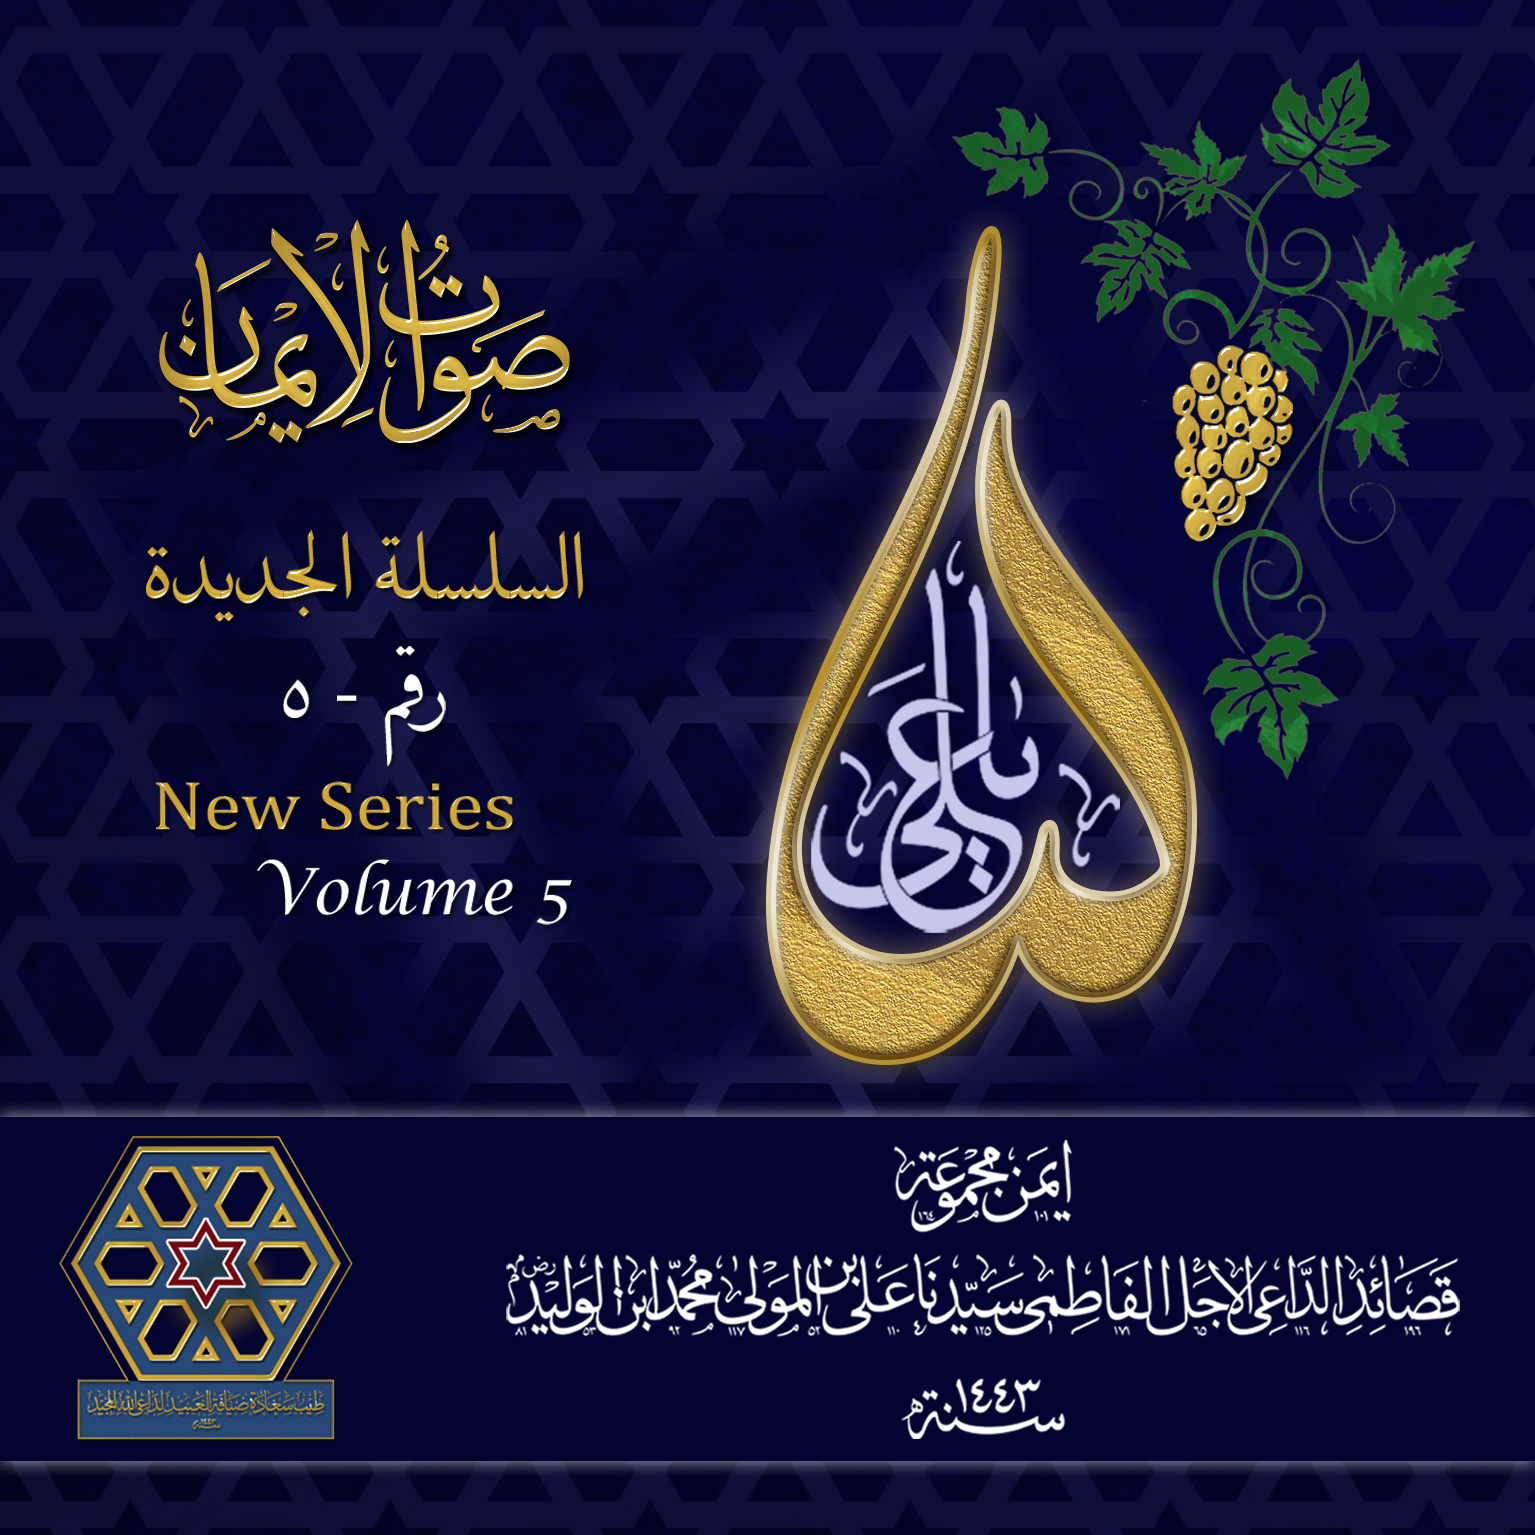 Volume Five of Sautuliman New Series